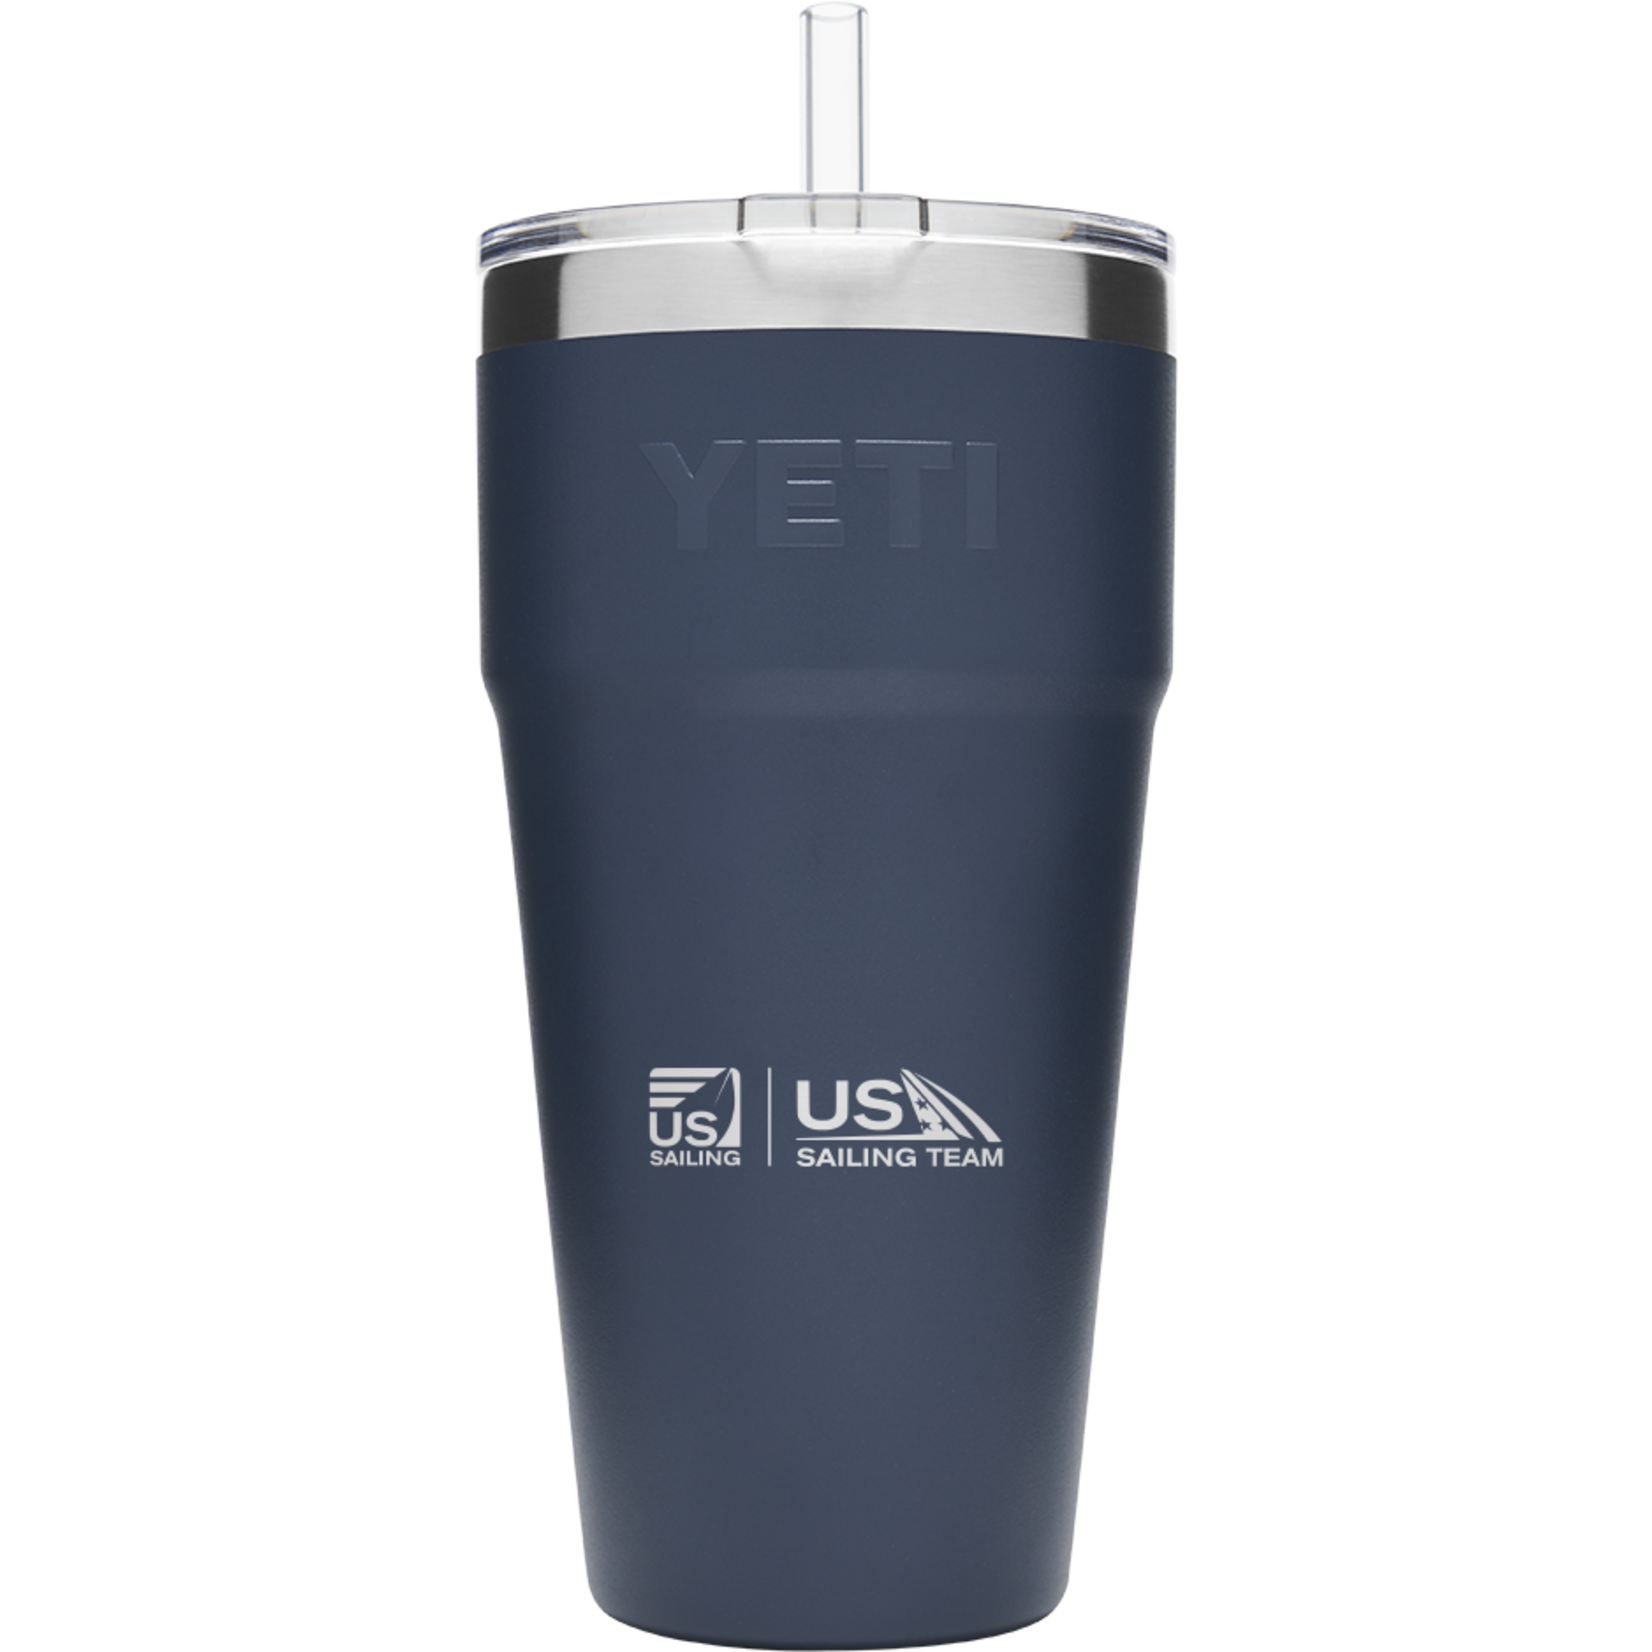 YETI YETI Rambler Stackable Cup with Straw 26 oz